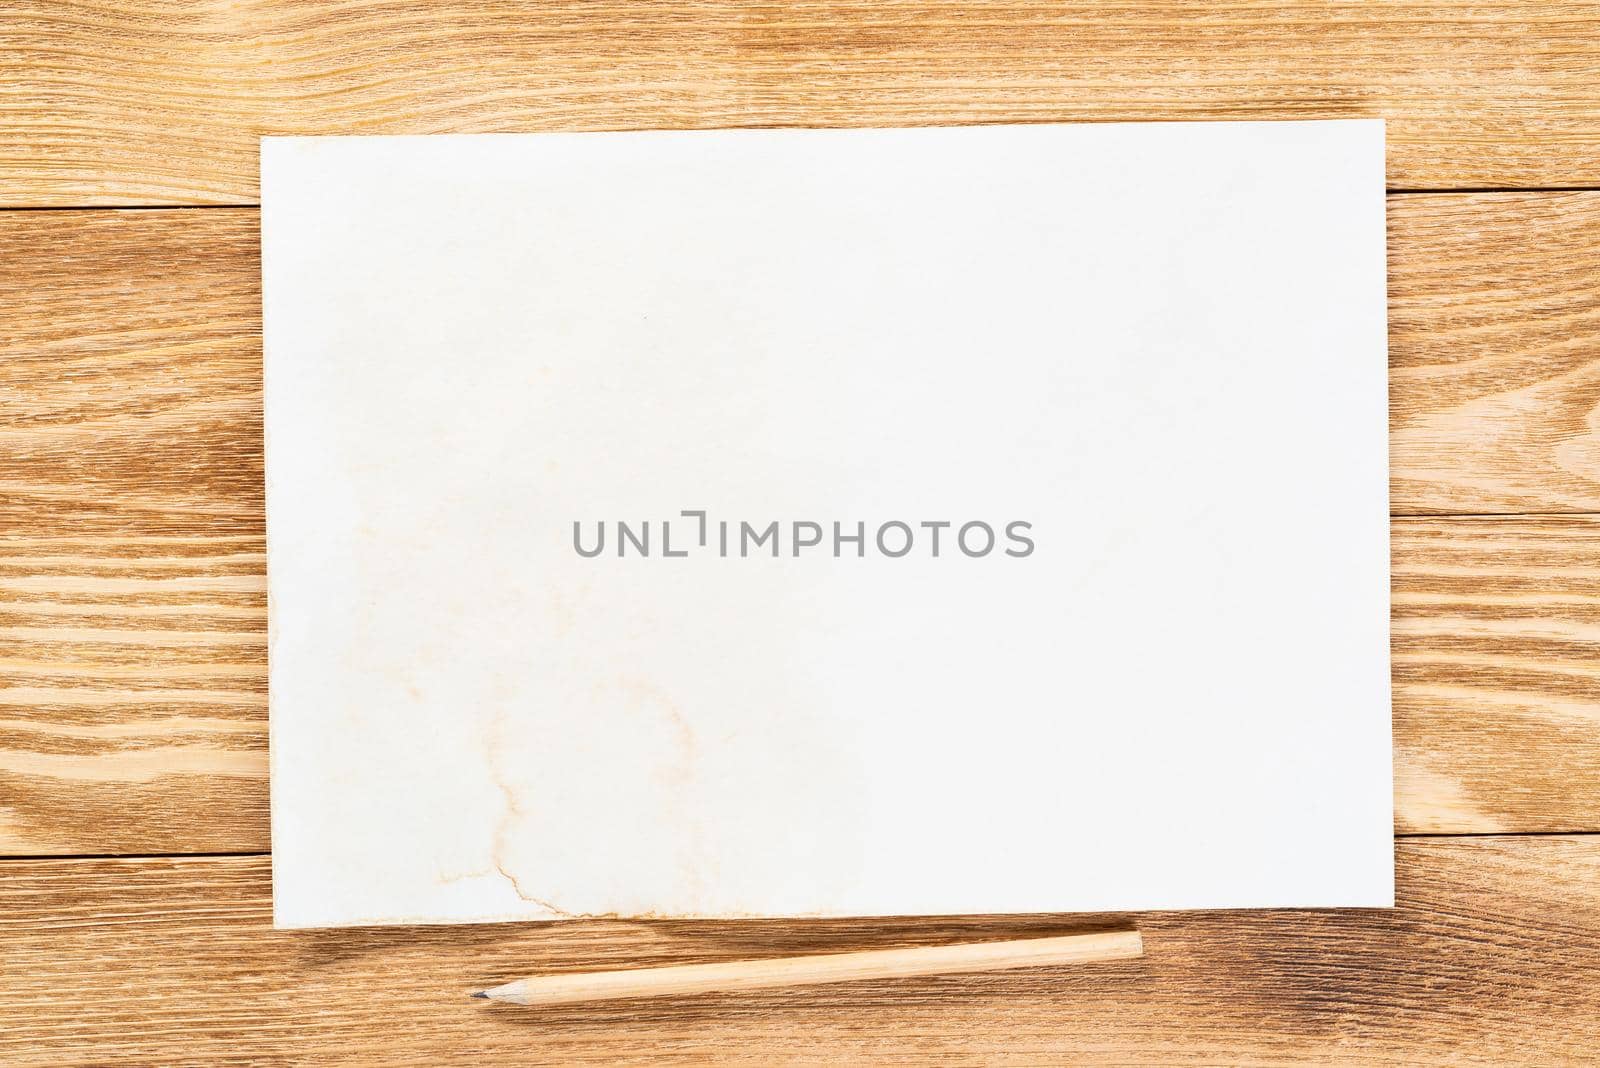 Sheet of paper lying on wooden table. Blank white a4 format paper with pencil. Textured natural wooden background. Vintage copy space for design. Business planning and idea generation.